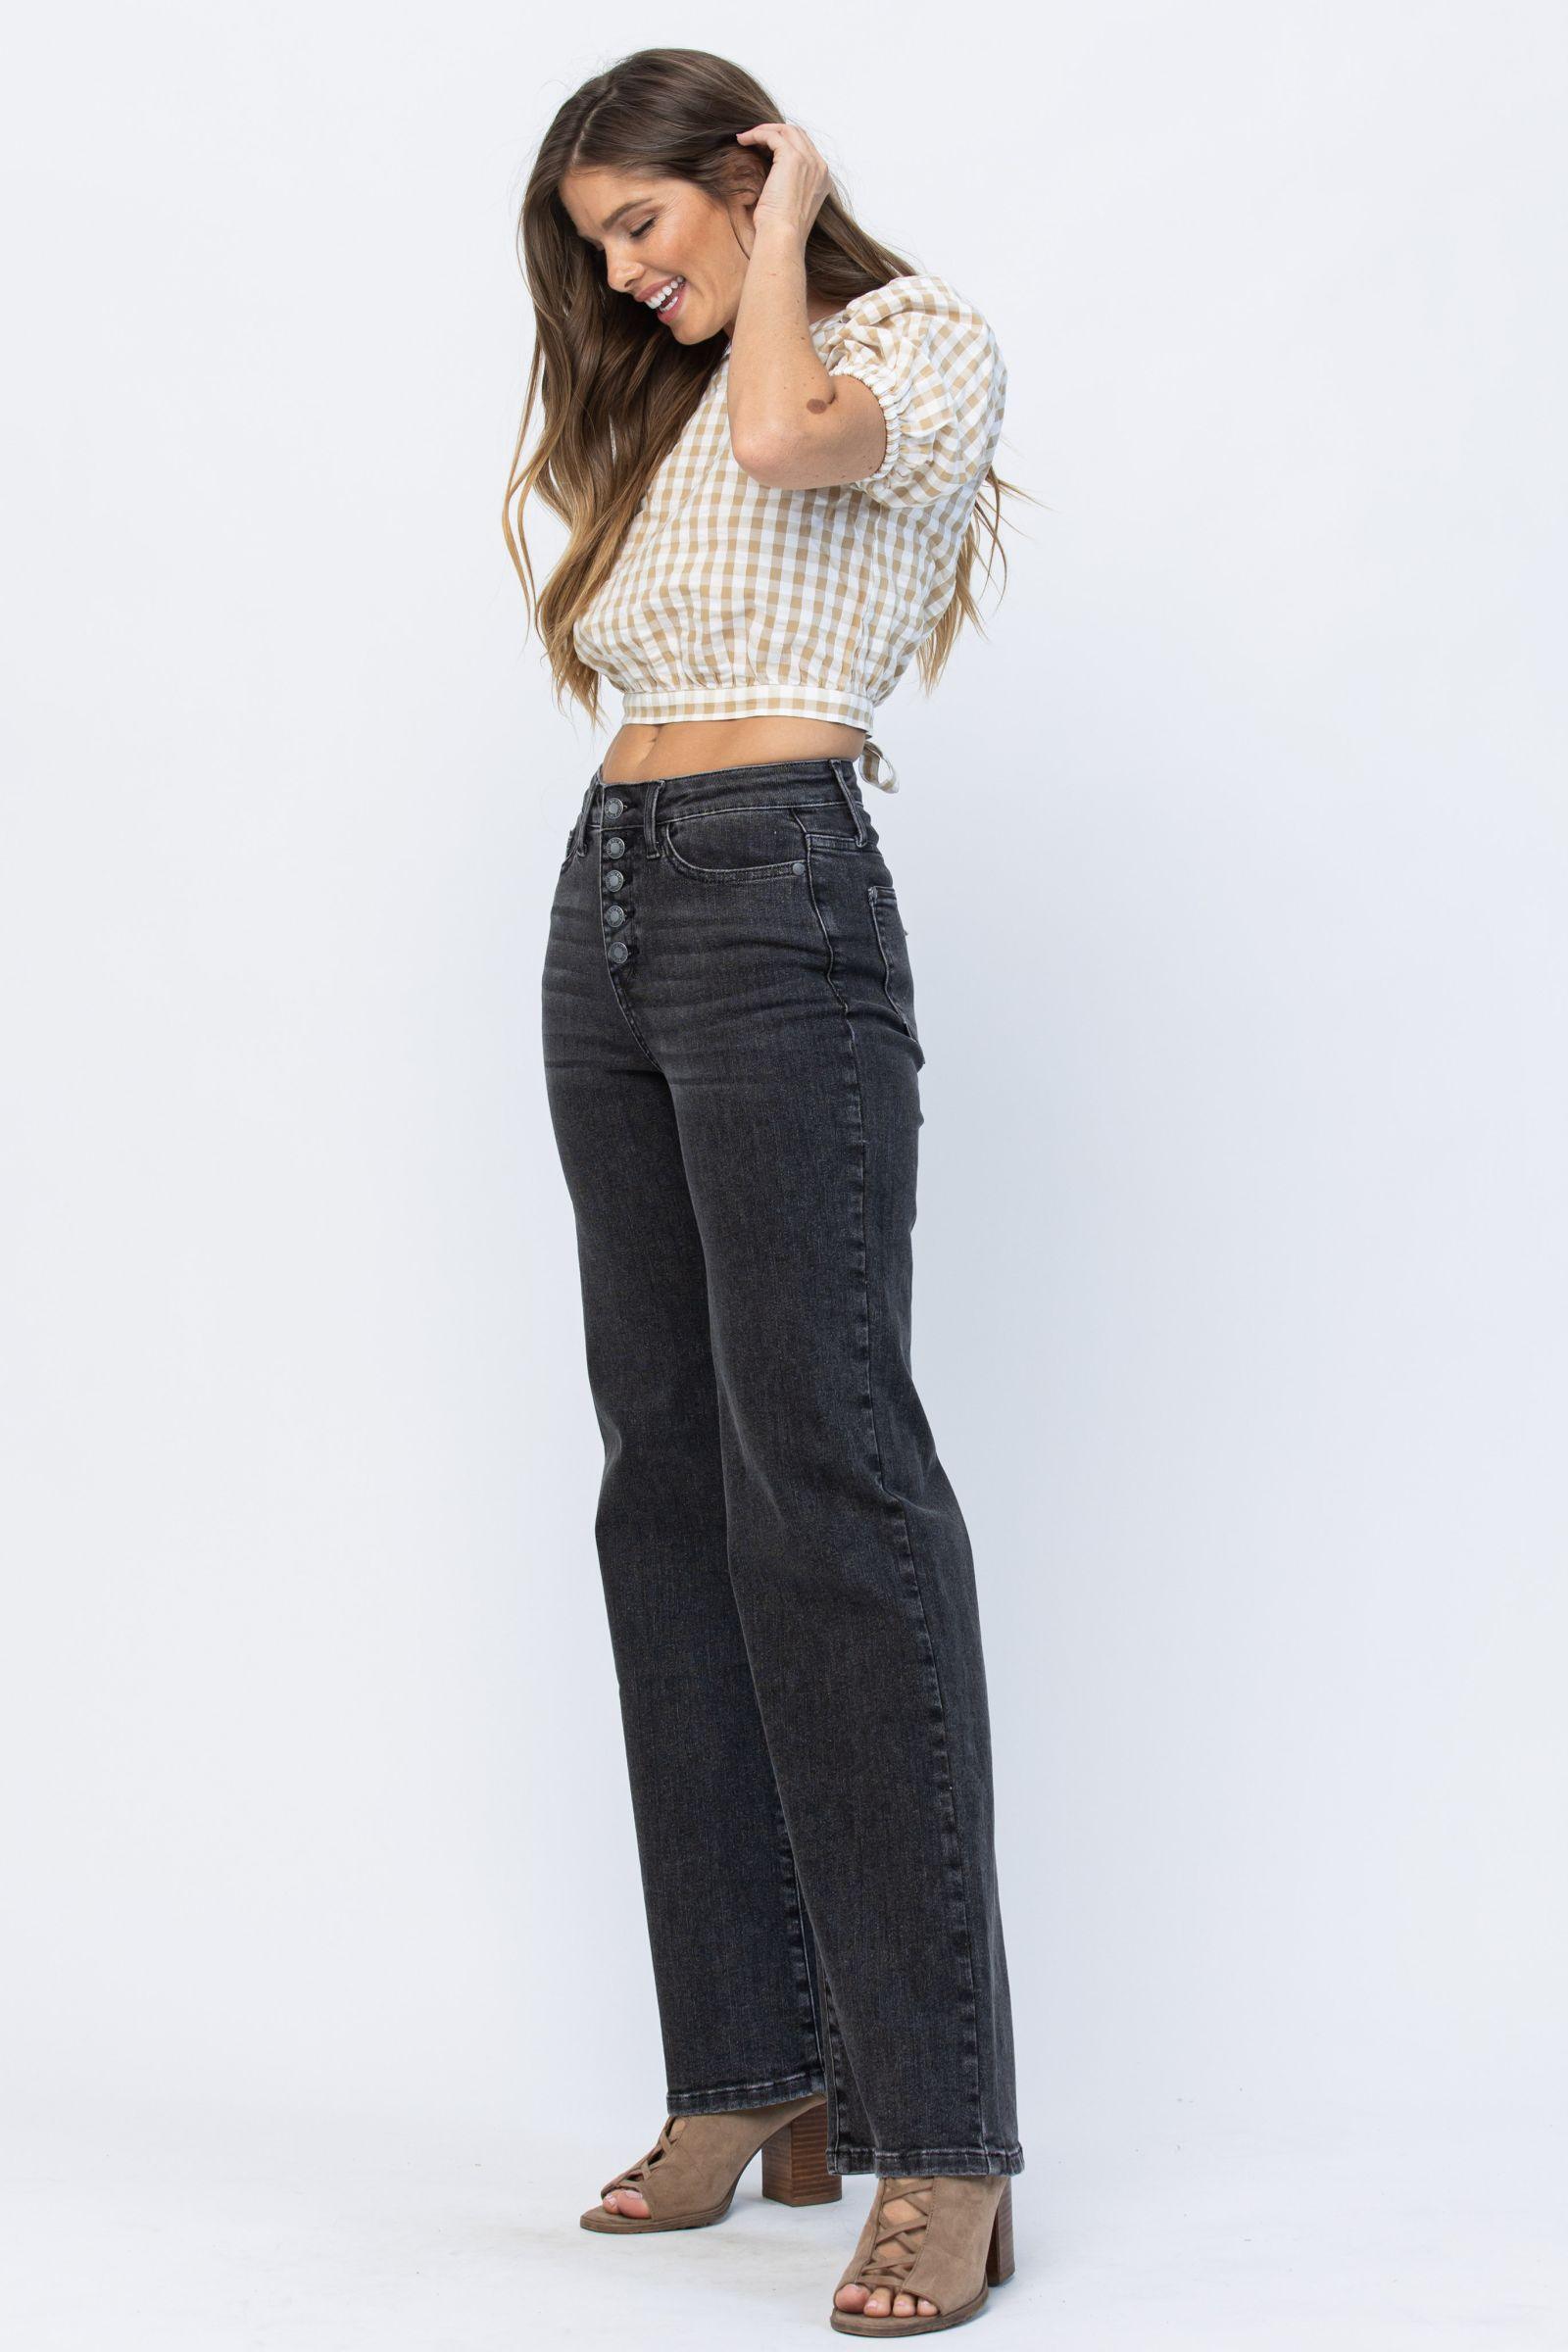 Buy Stylish Trouser Jeans Collection At Best Prices Online